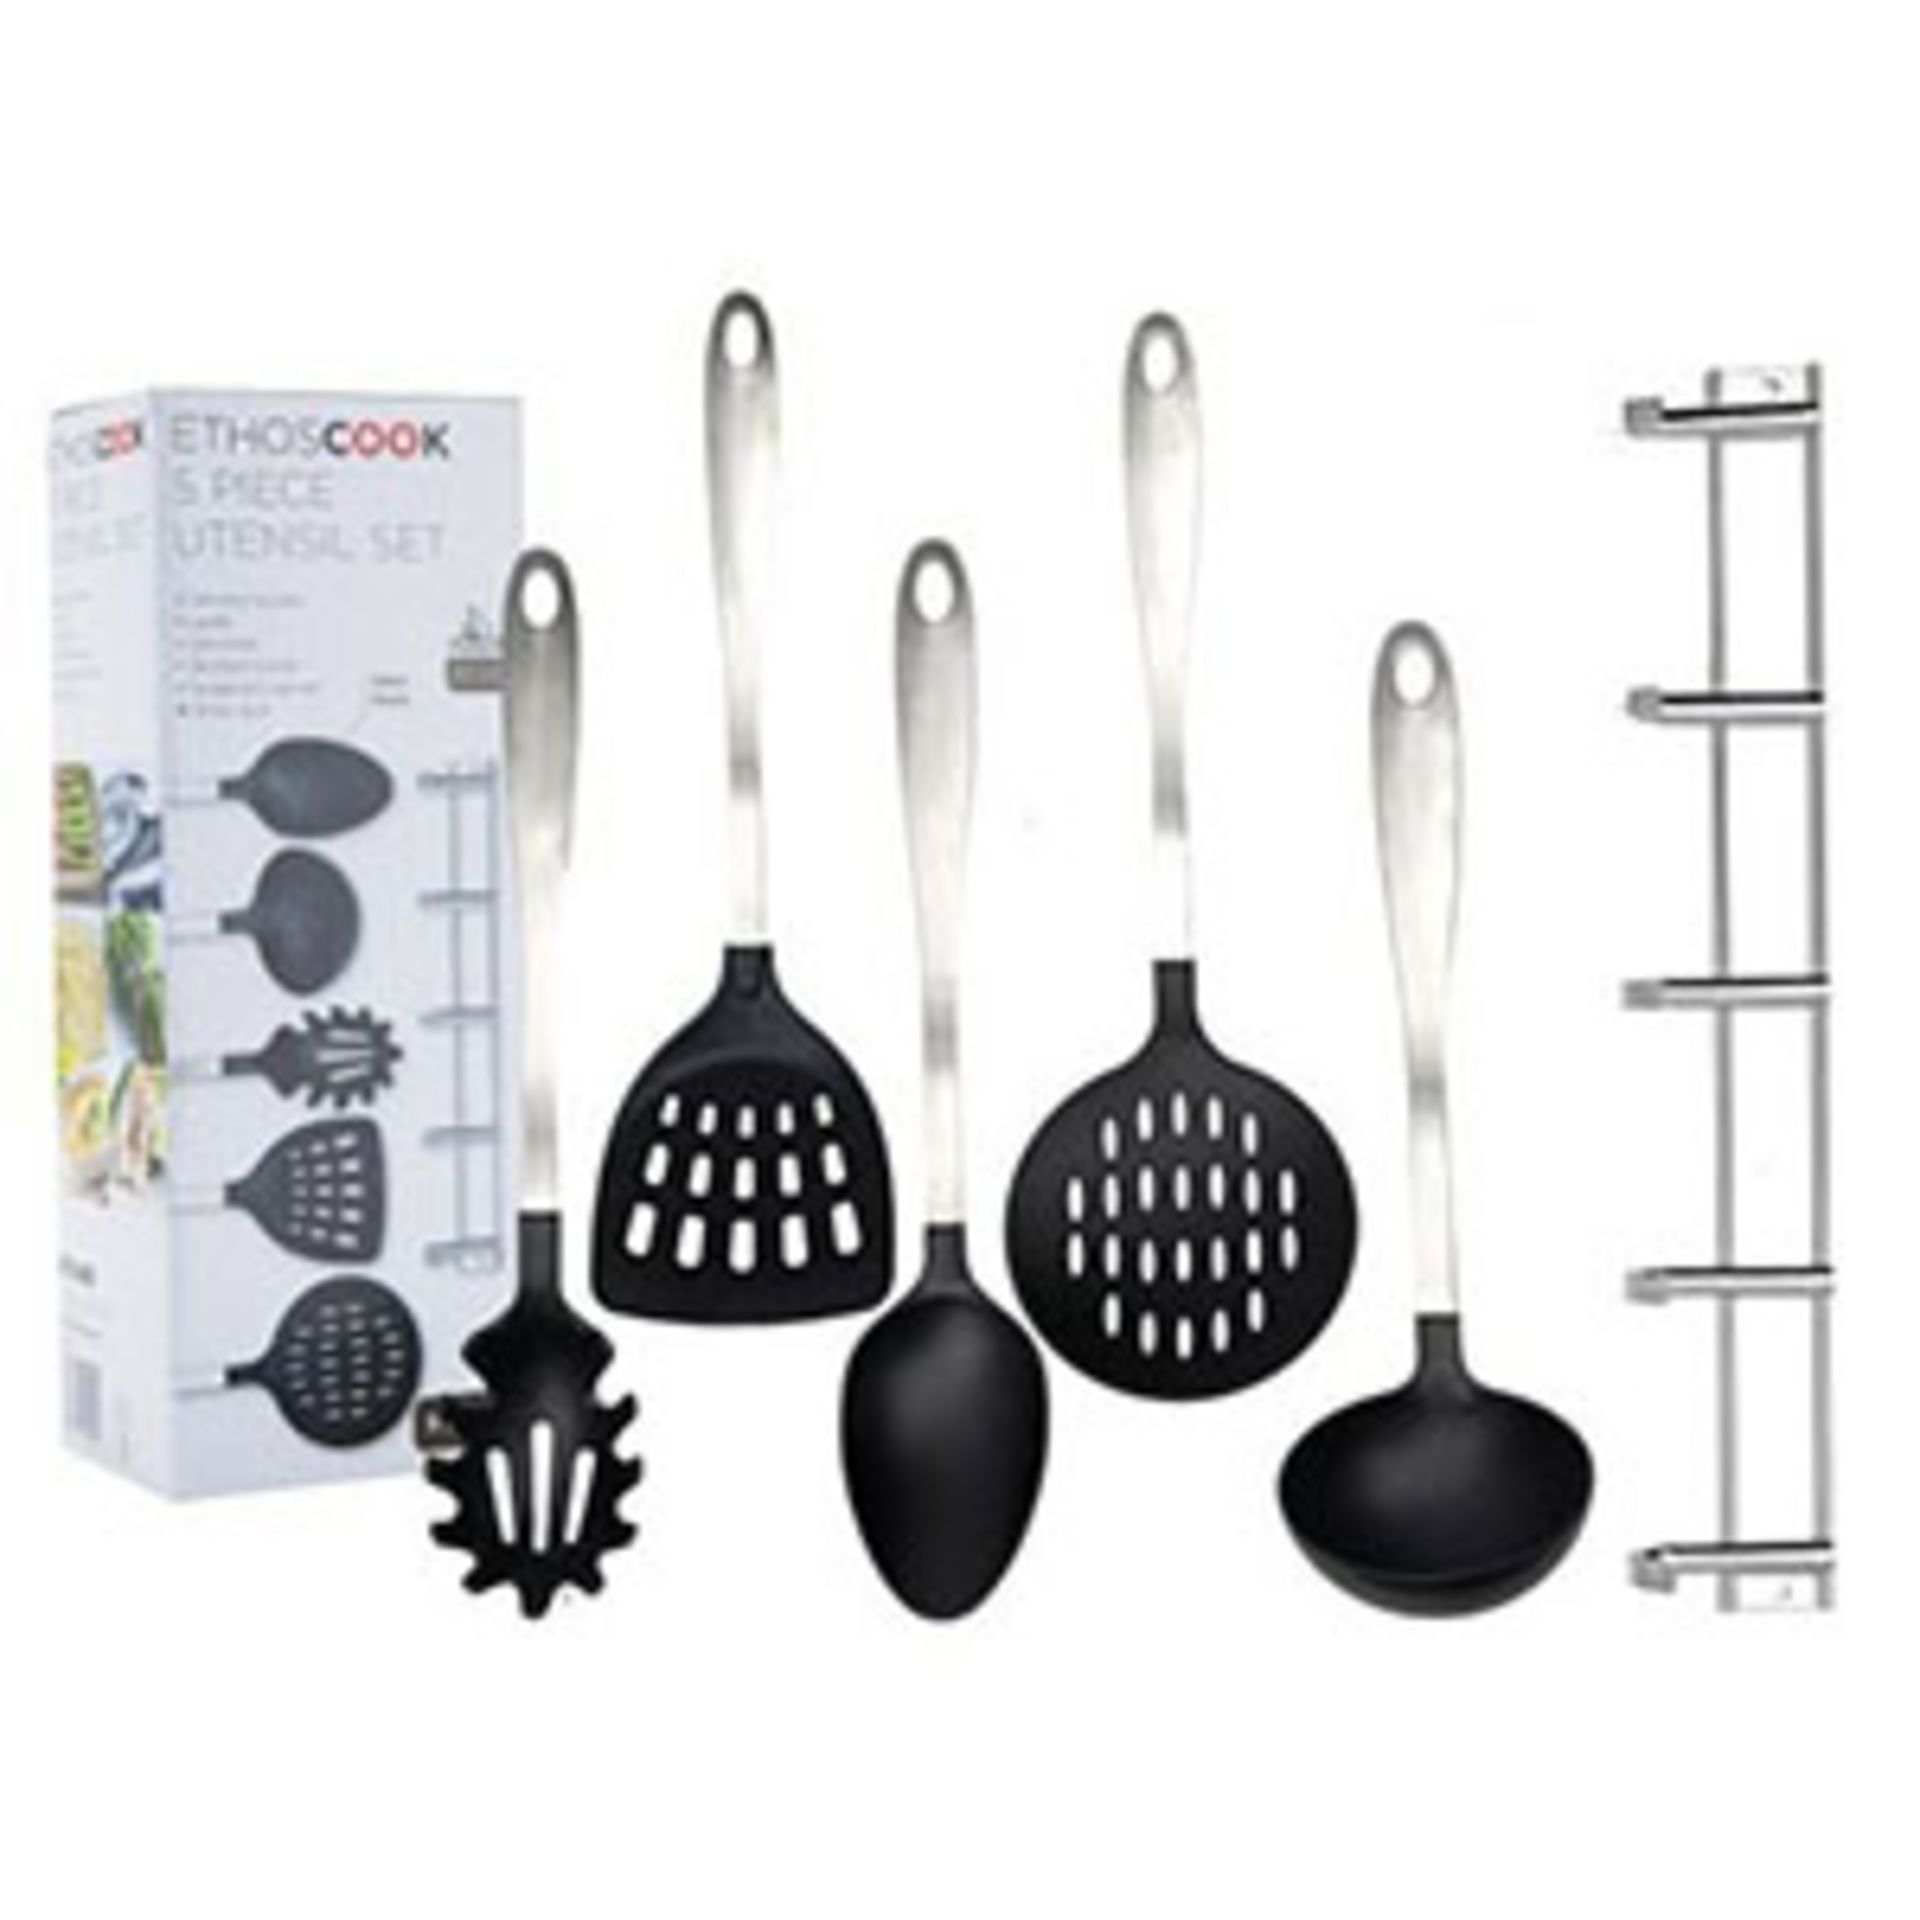 V *TRADE QTY* Brand New Ethos Cook 5 Piece Utensil Set Plus Wire Rack For Wall Mounting - Nylon